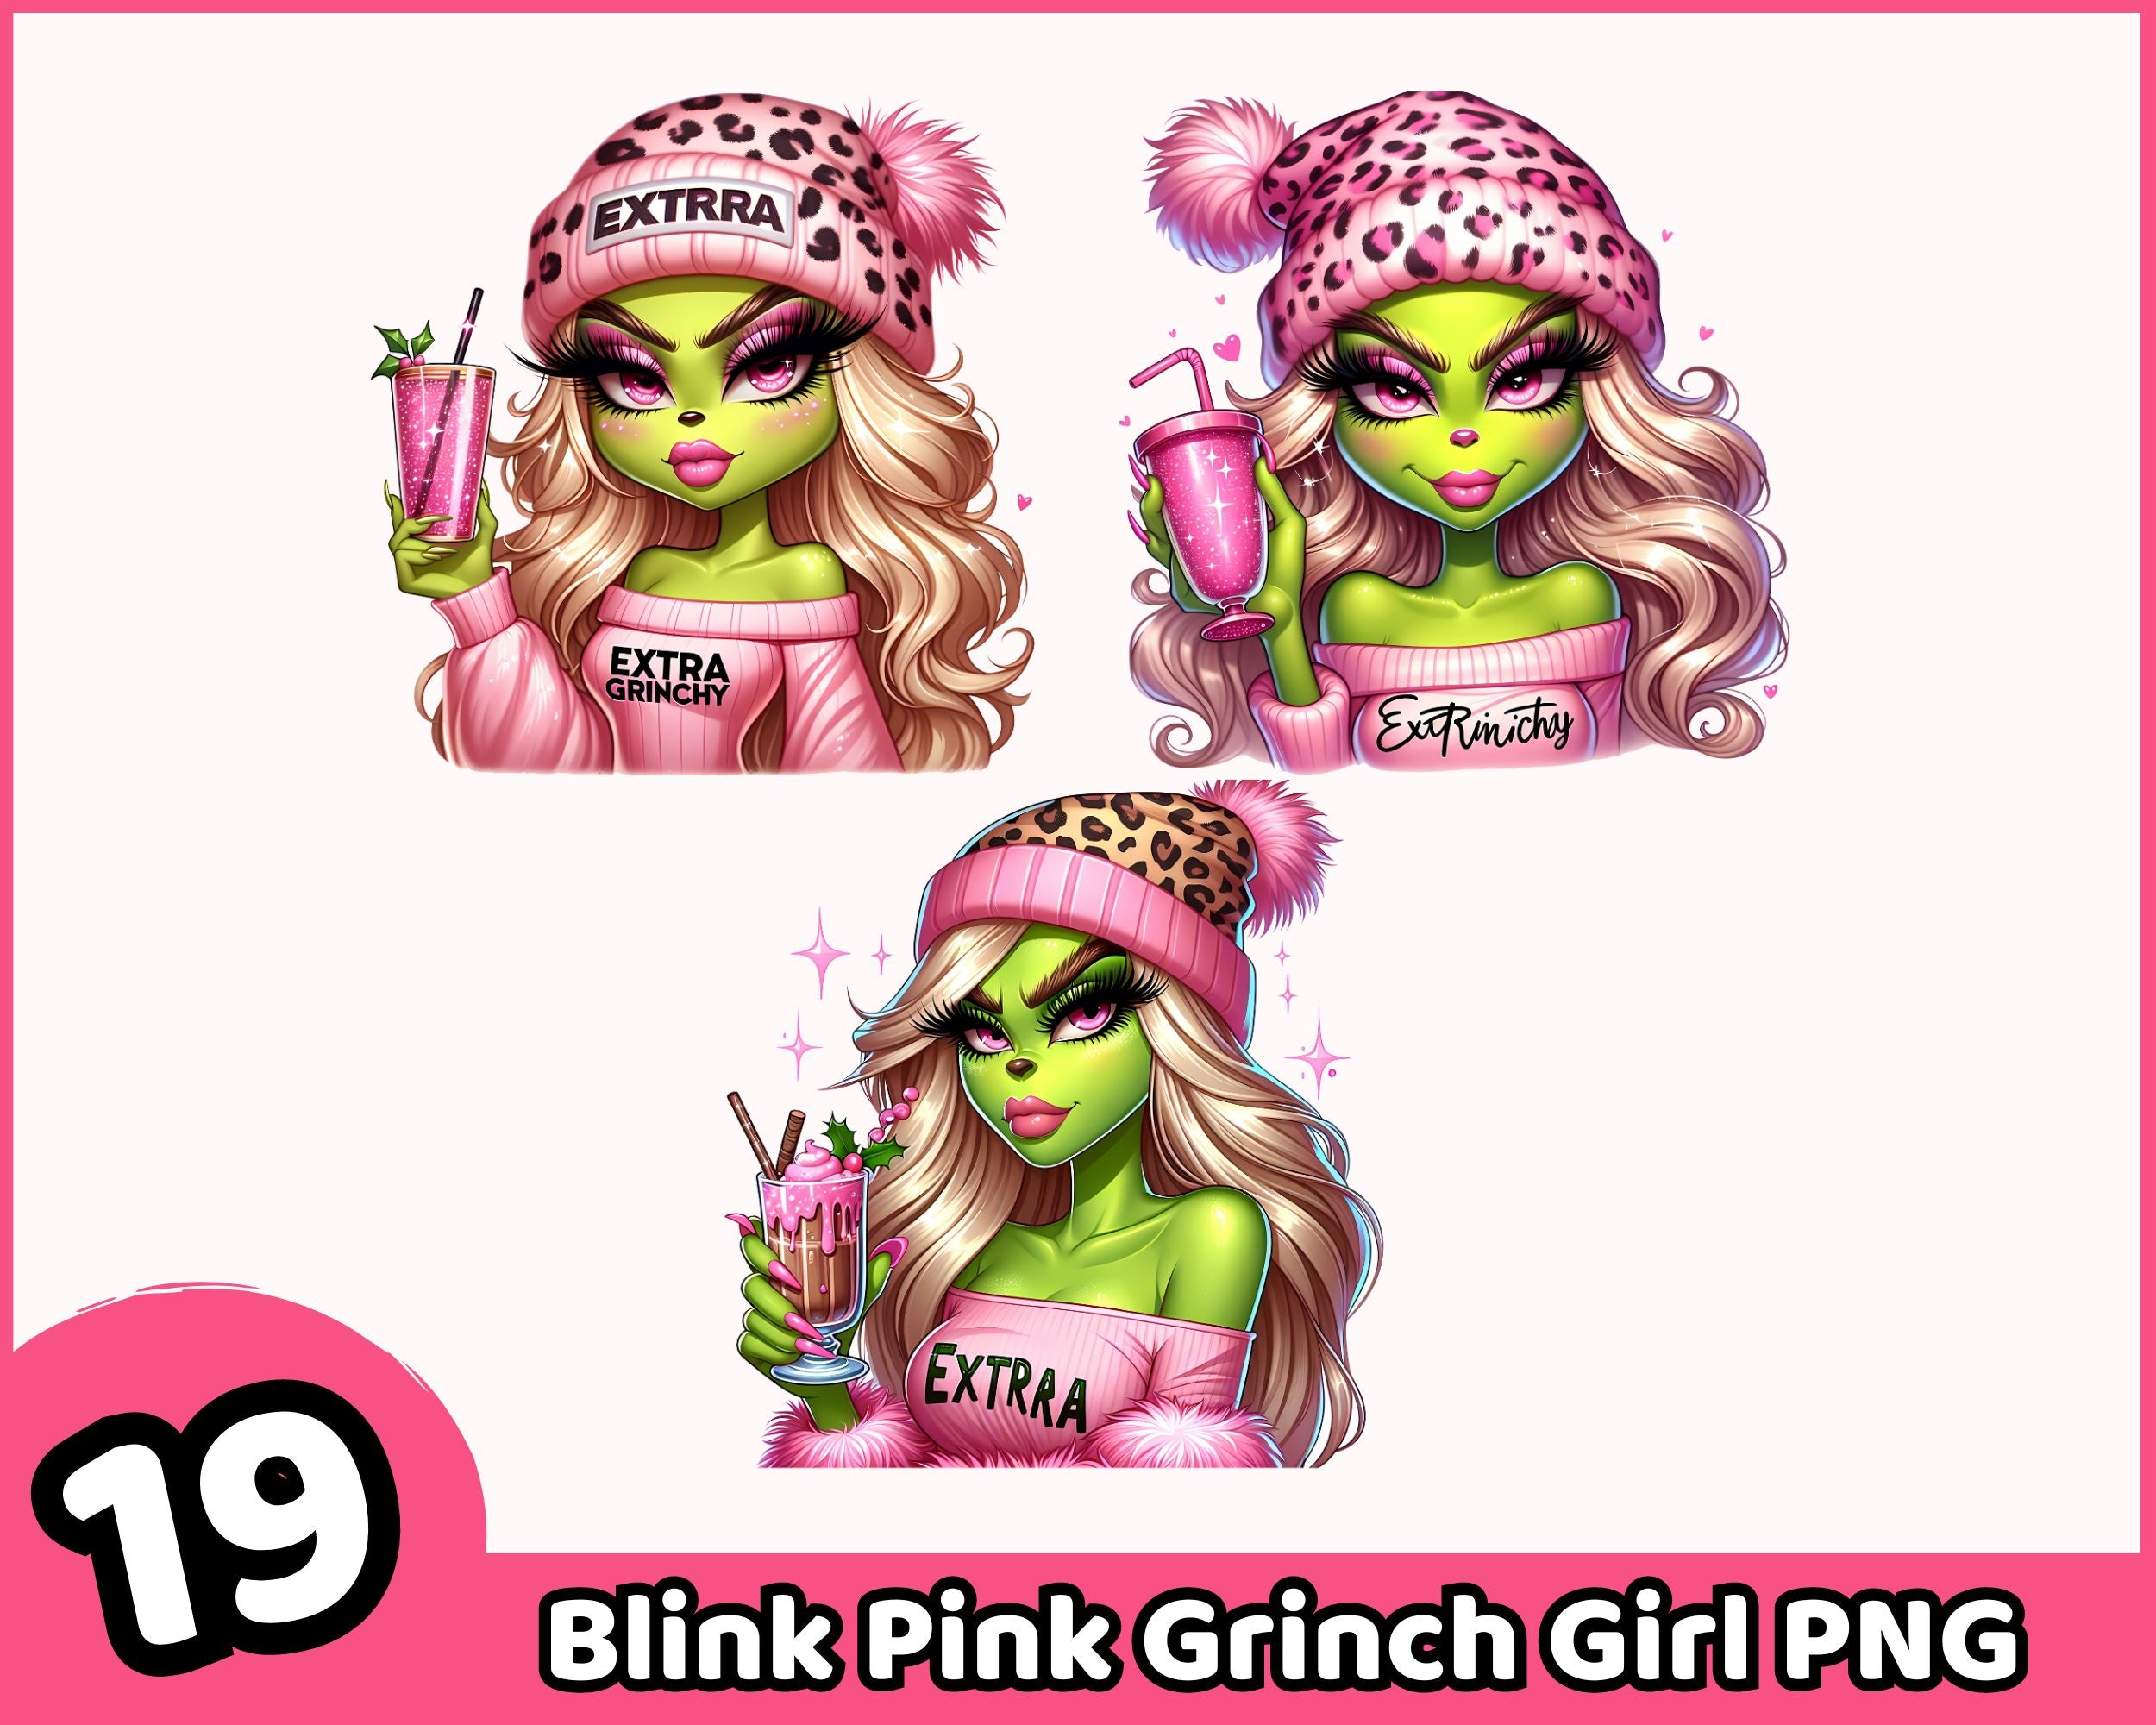 Pink Boujee Grinch Png, Cute Girl Grinch Png, Cheetah Print, Christmas Png, Super cute Grinch Png